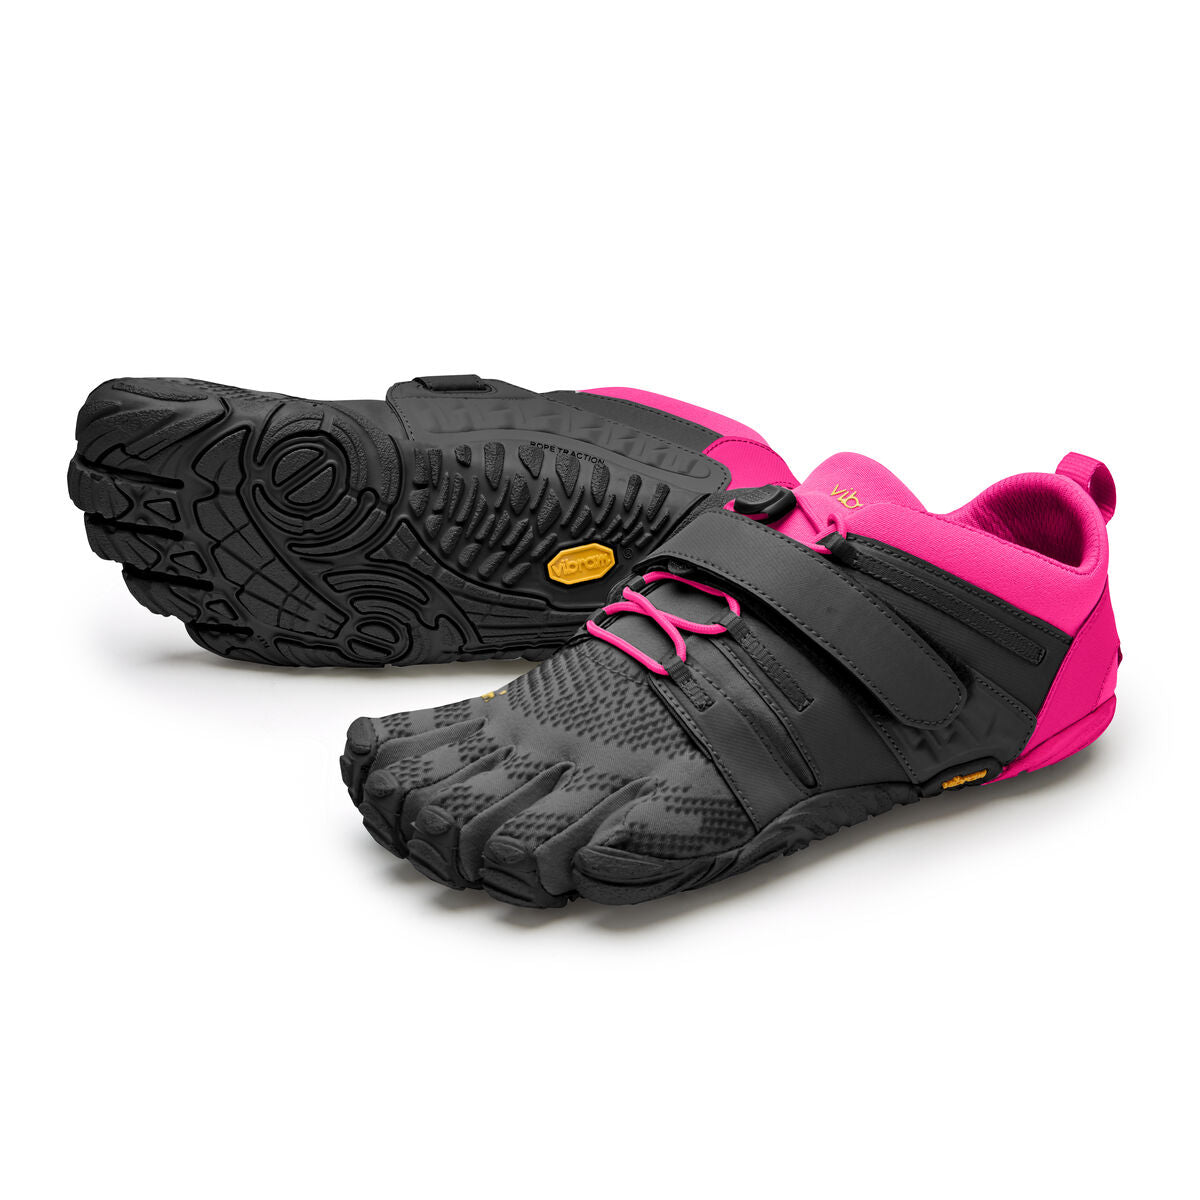 Women's Vibram Five Fingers V-Train 2.0 Fitness and Training Shoe in Black/Pink from the front